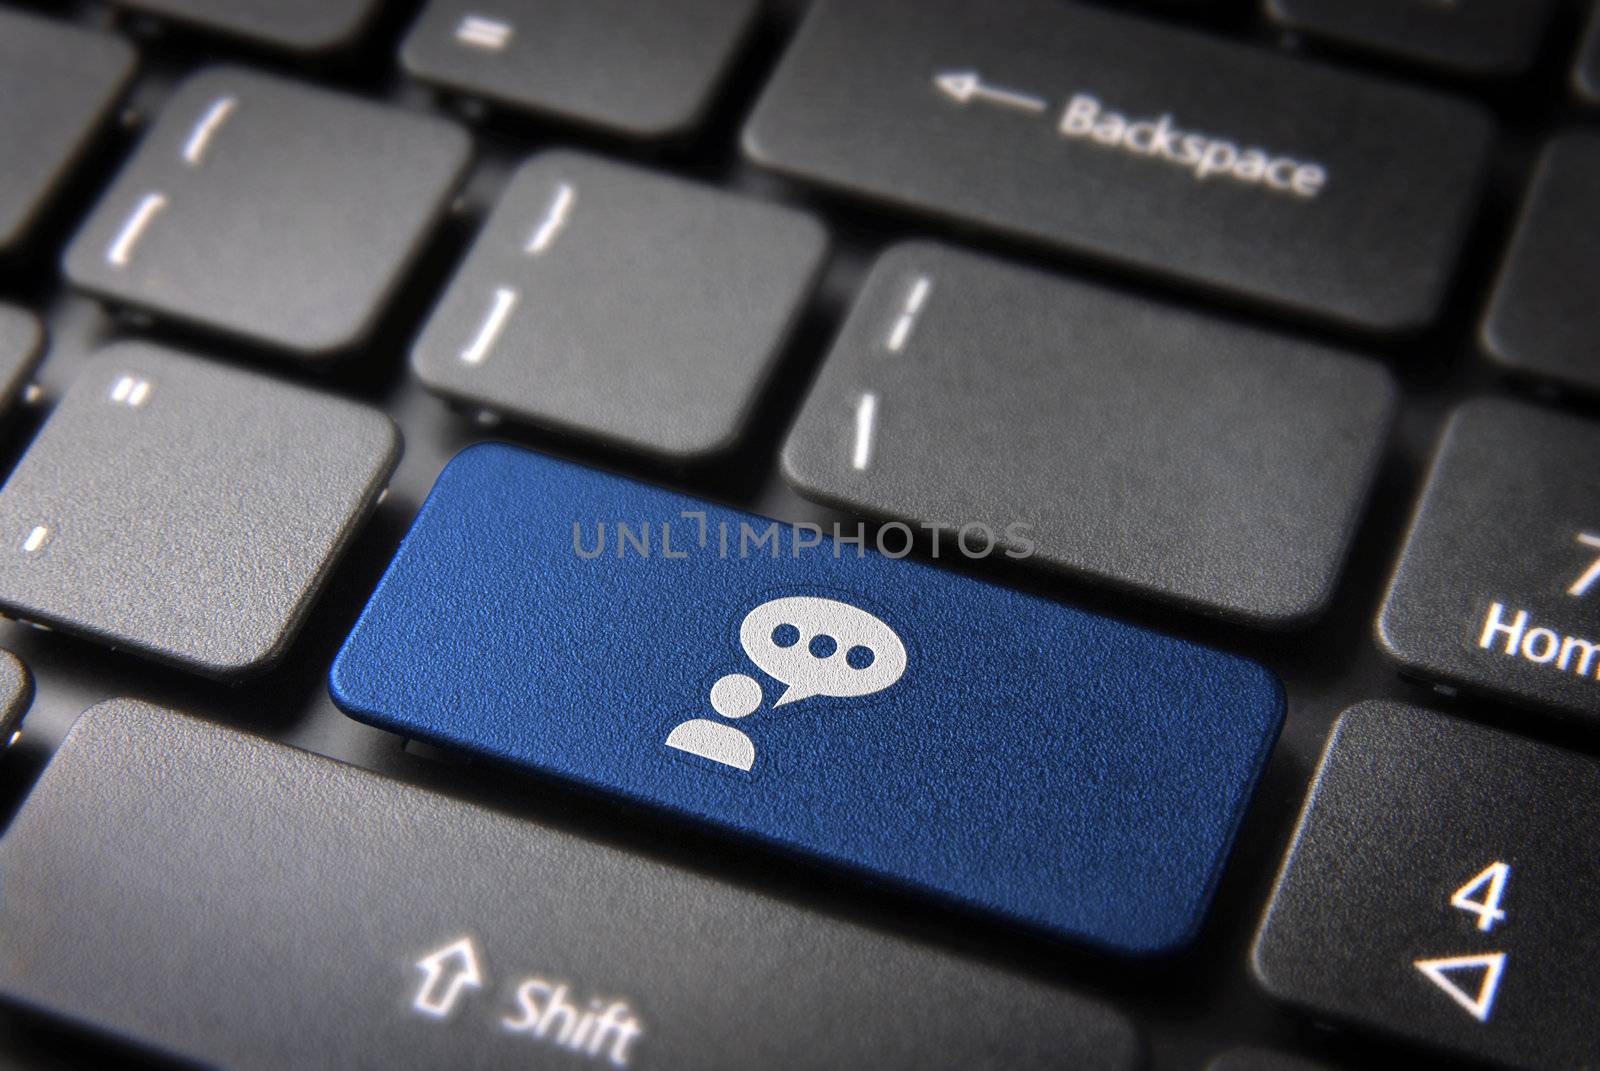 Social media key with people chat icon on laptop keyboard. Included clipping path, so you can easily edit it.